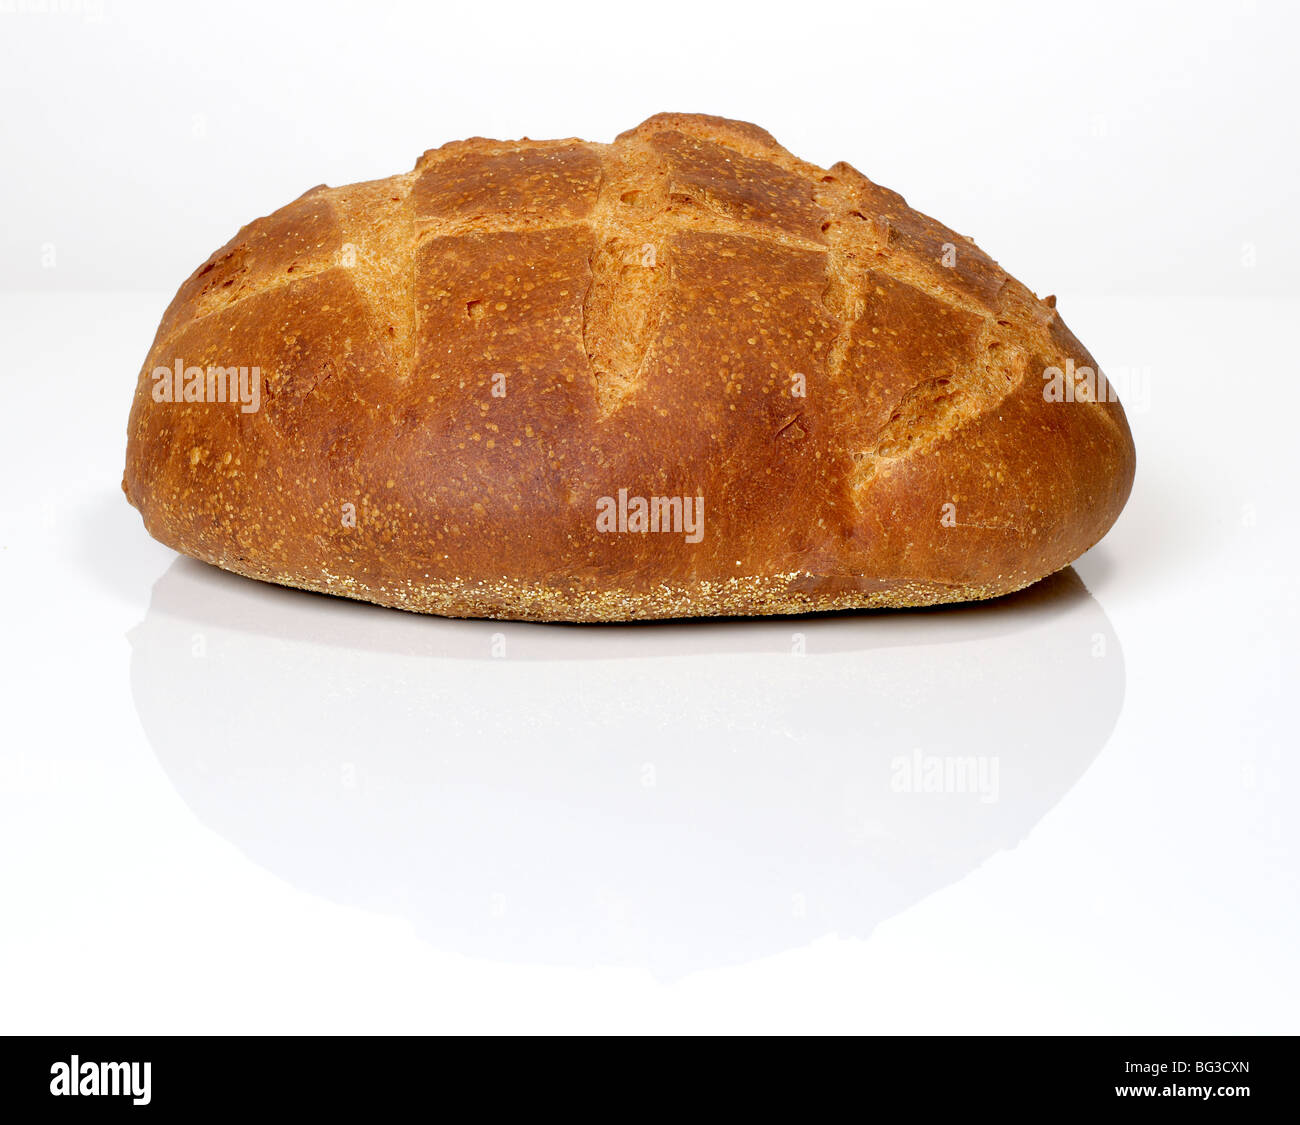 Loaf of bread Stock Photo